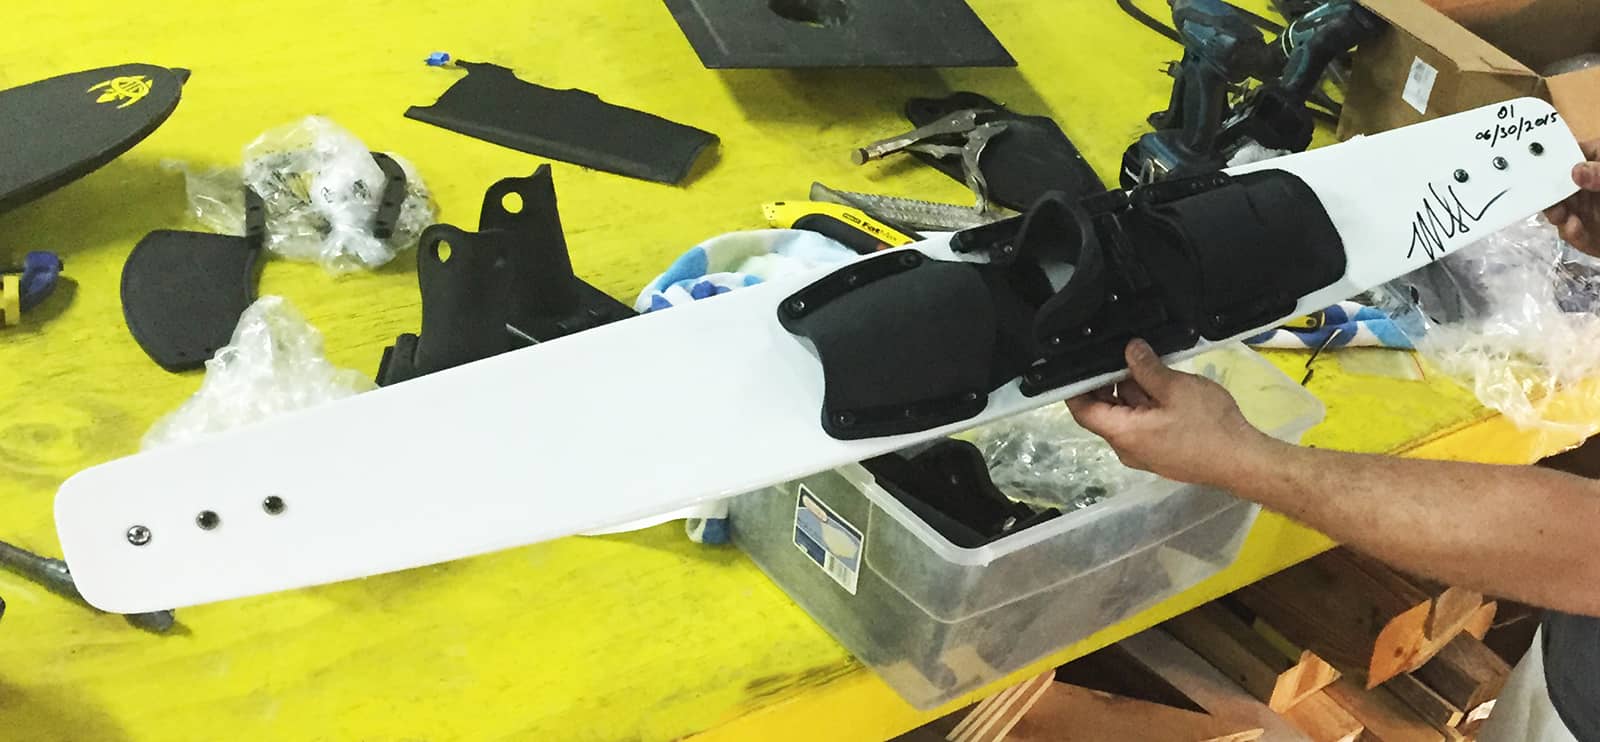 white slalom ski being held after final production.